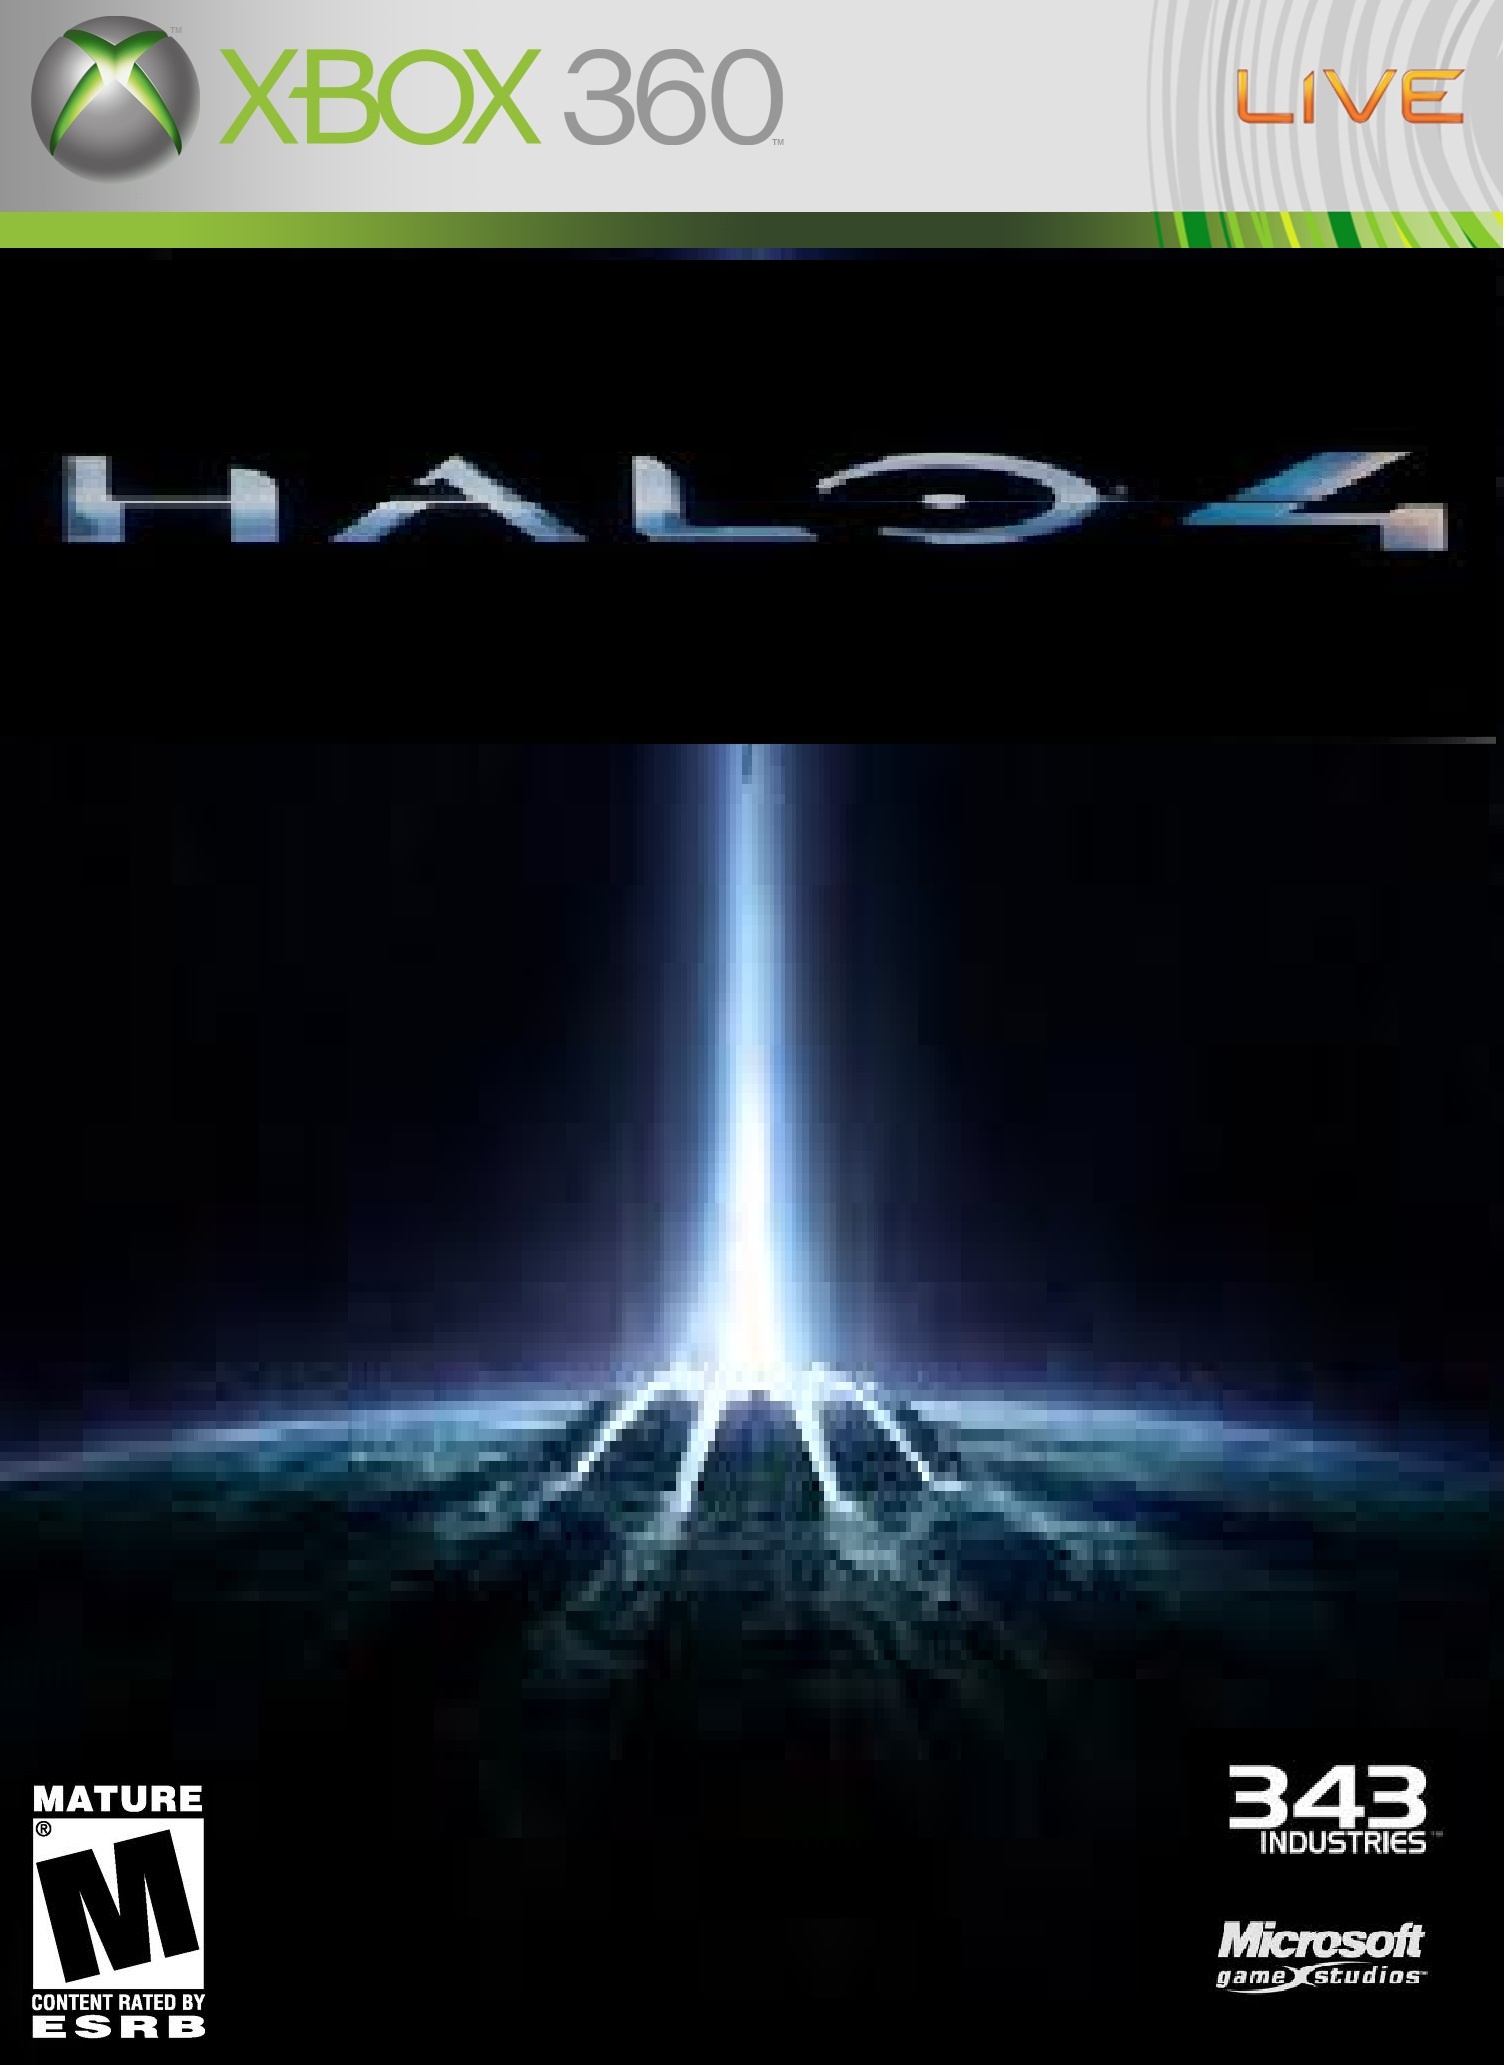 Halo 4 Limited Edition box cover